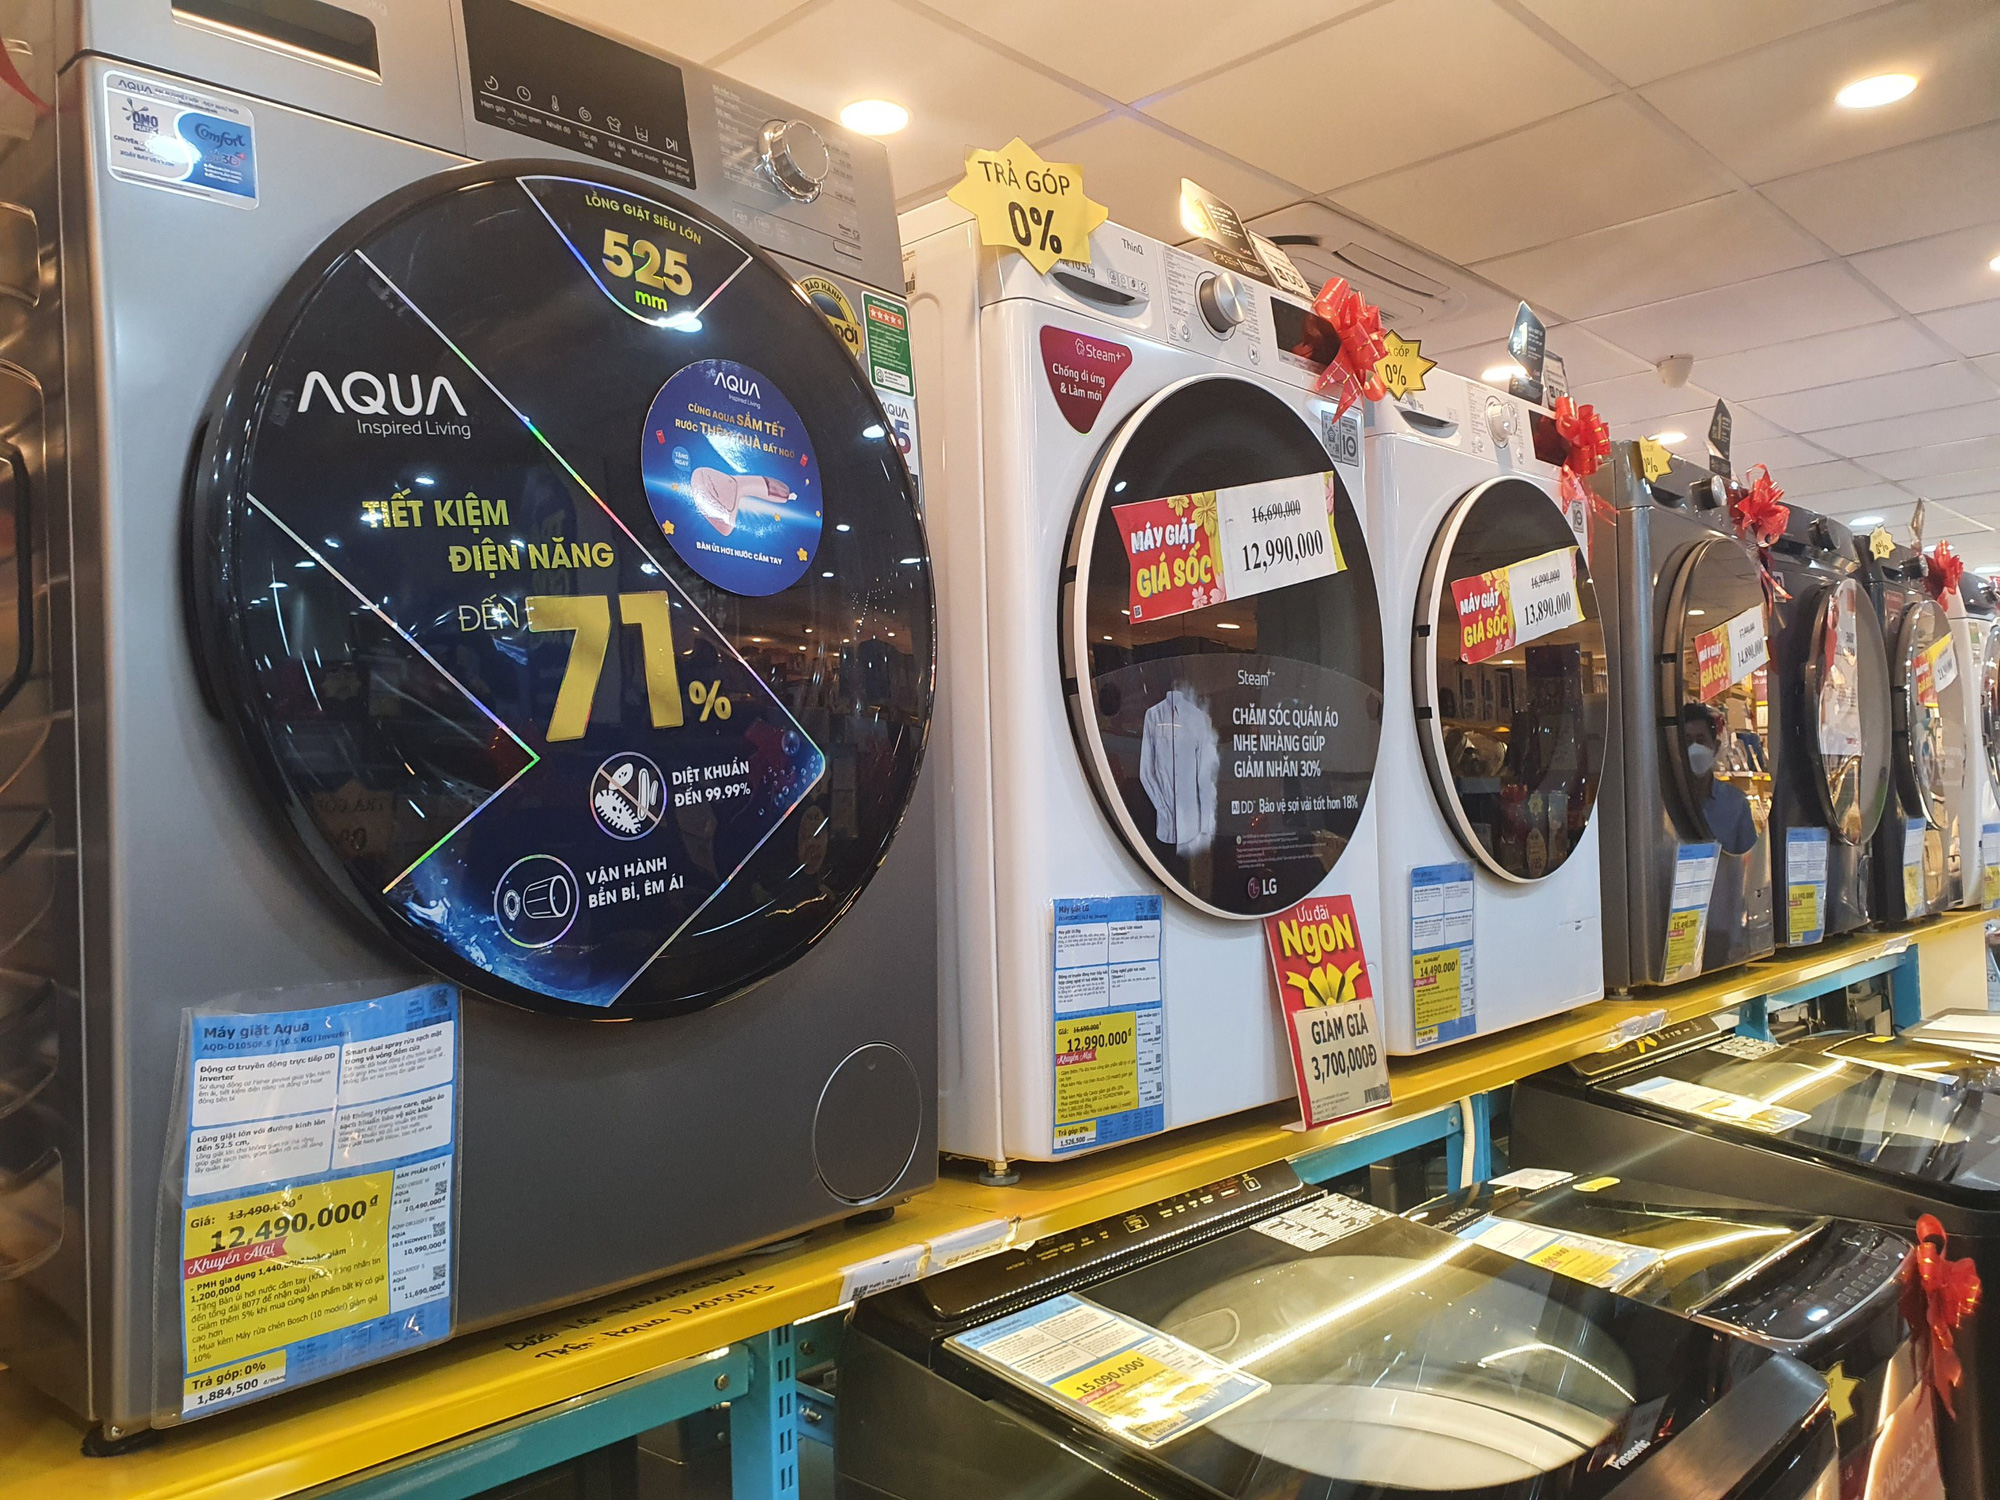 Washing machines at the same time deeply discounted up to 50% - Photo 2.